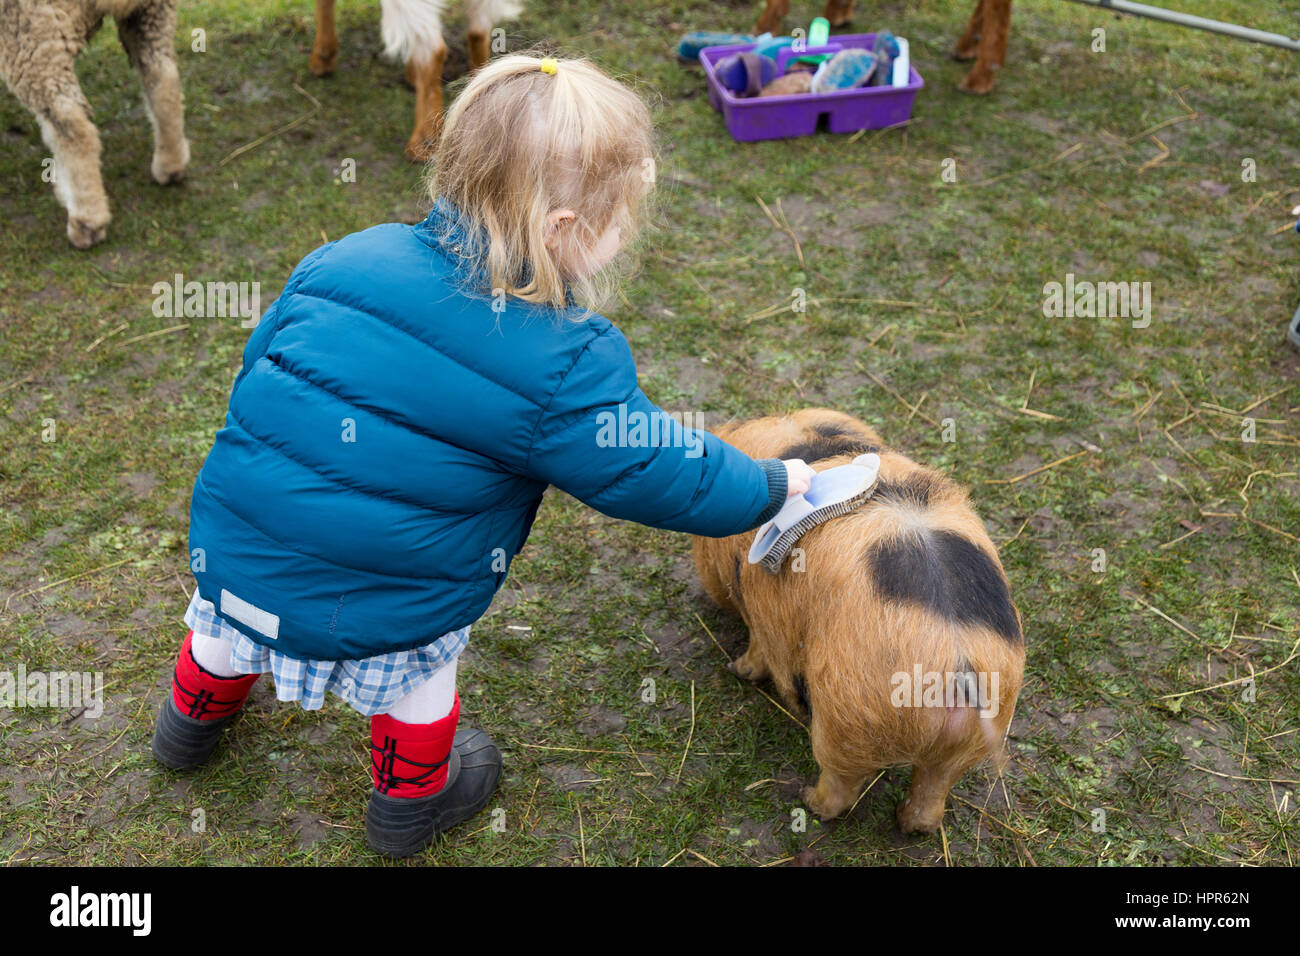 A two year old child / toddler stroking and brushing a young pig / piglet during a visit by a visiting urban farm to a suburban town / school. UK. Stock Photo